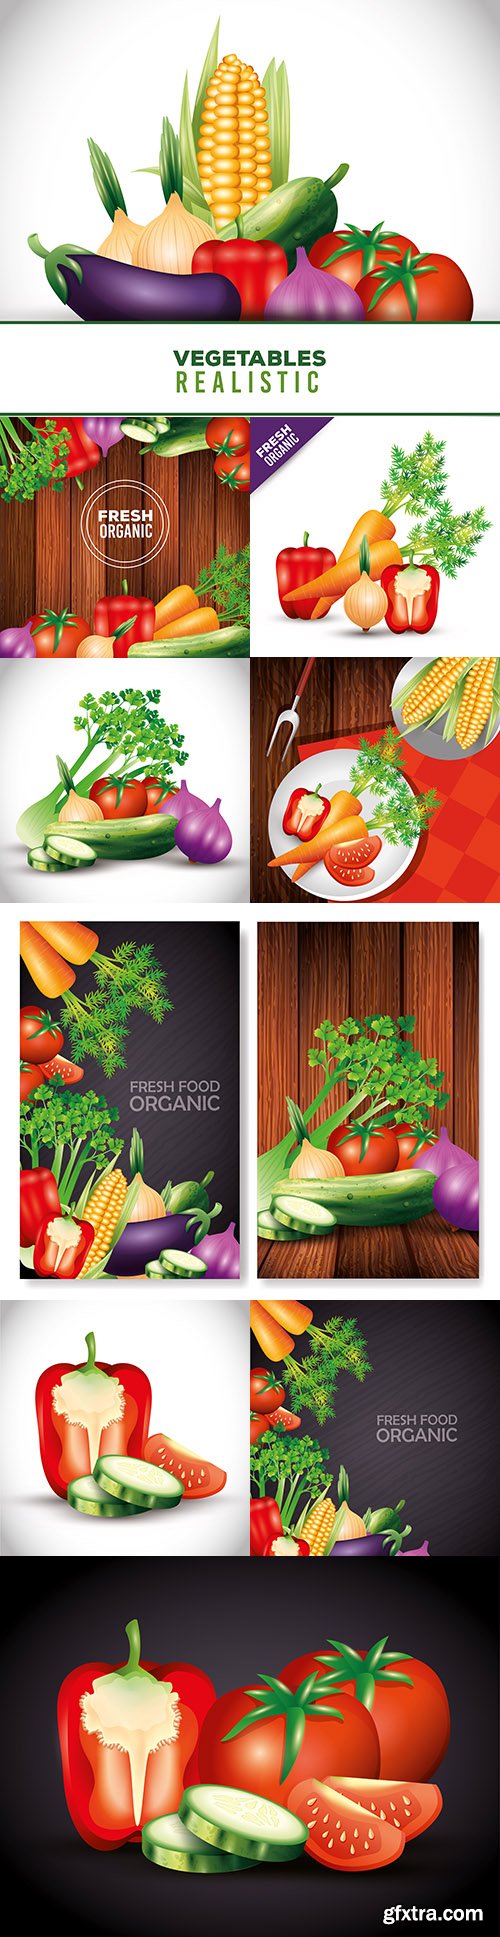 Fresh organic vegetables and healthy lifestyle for diet